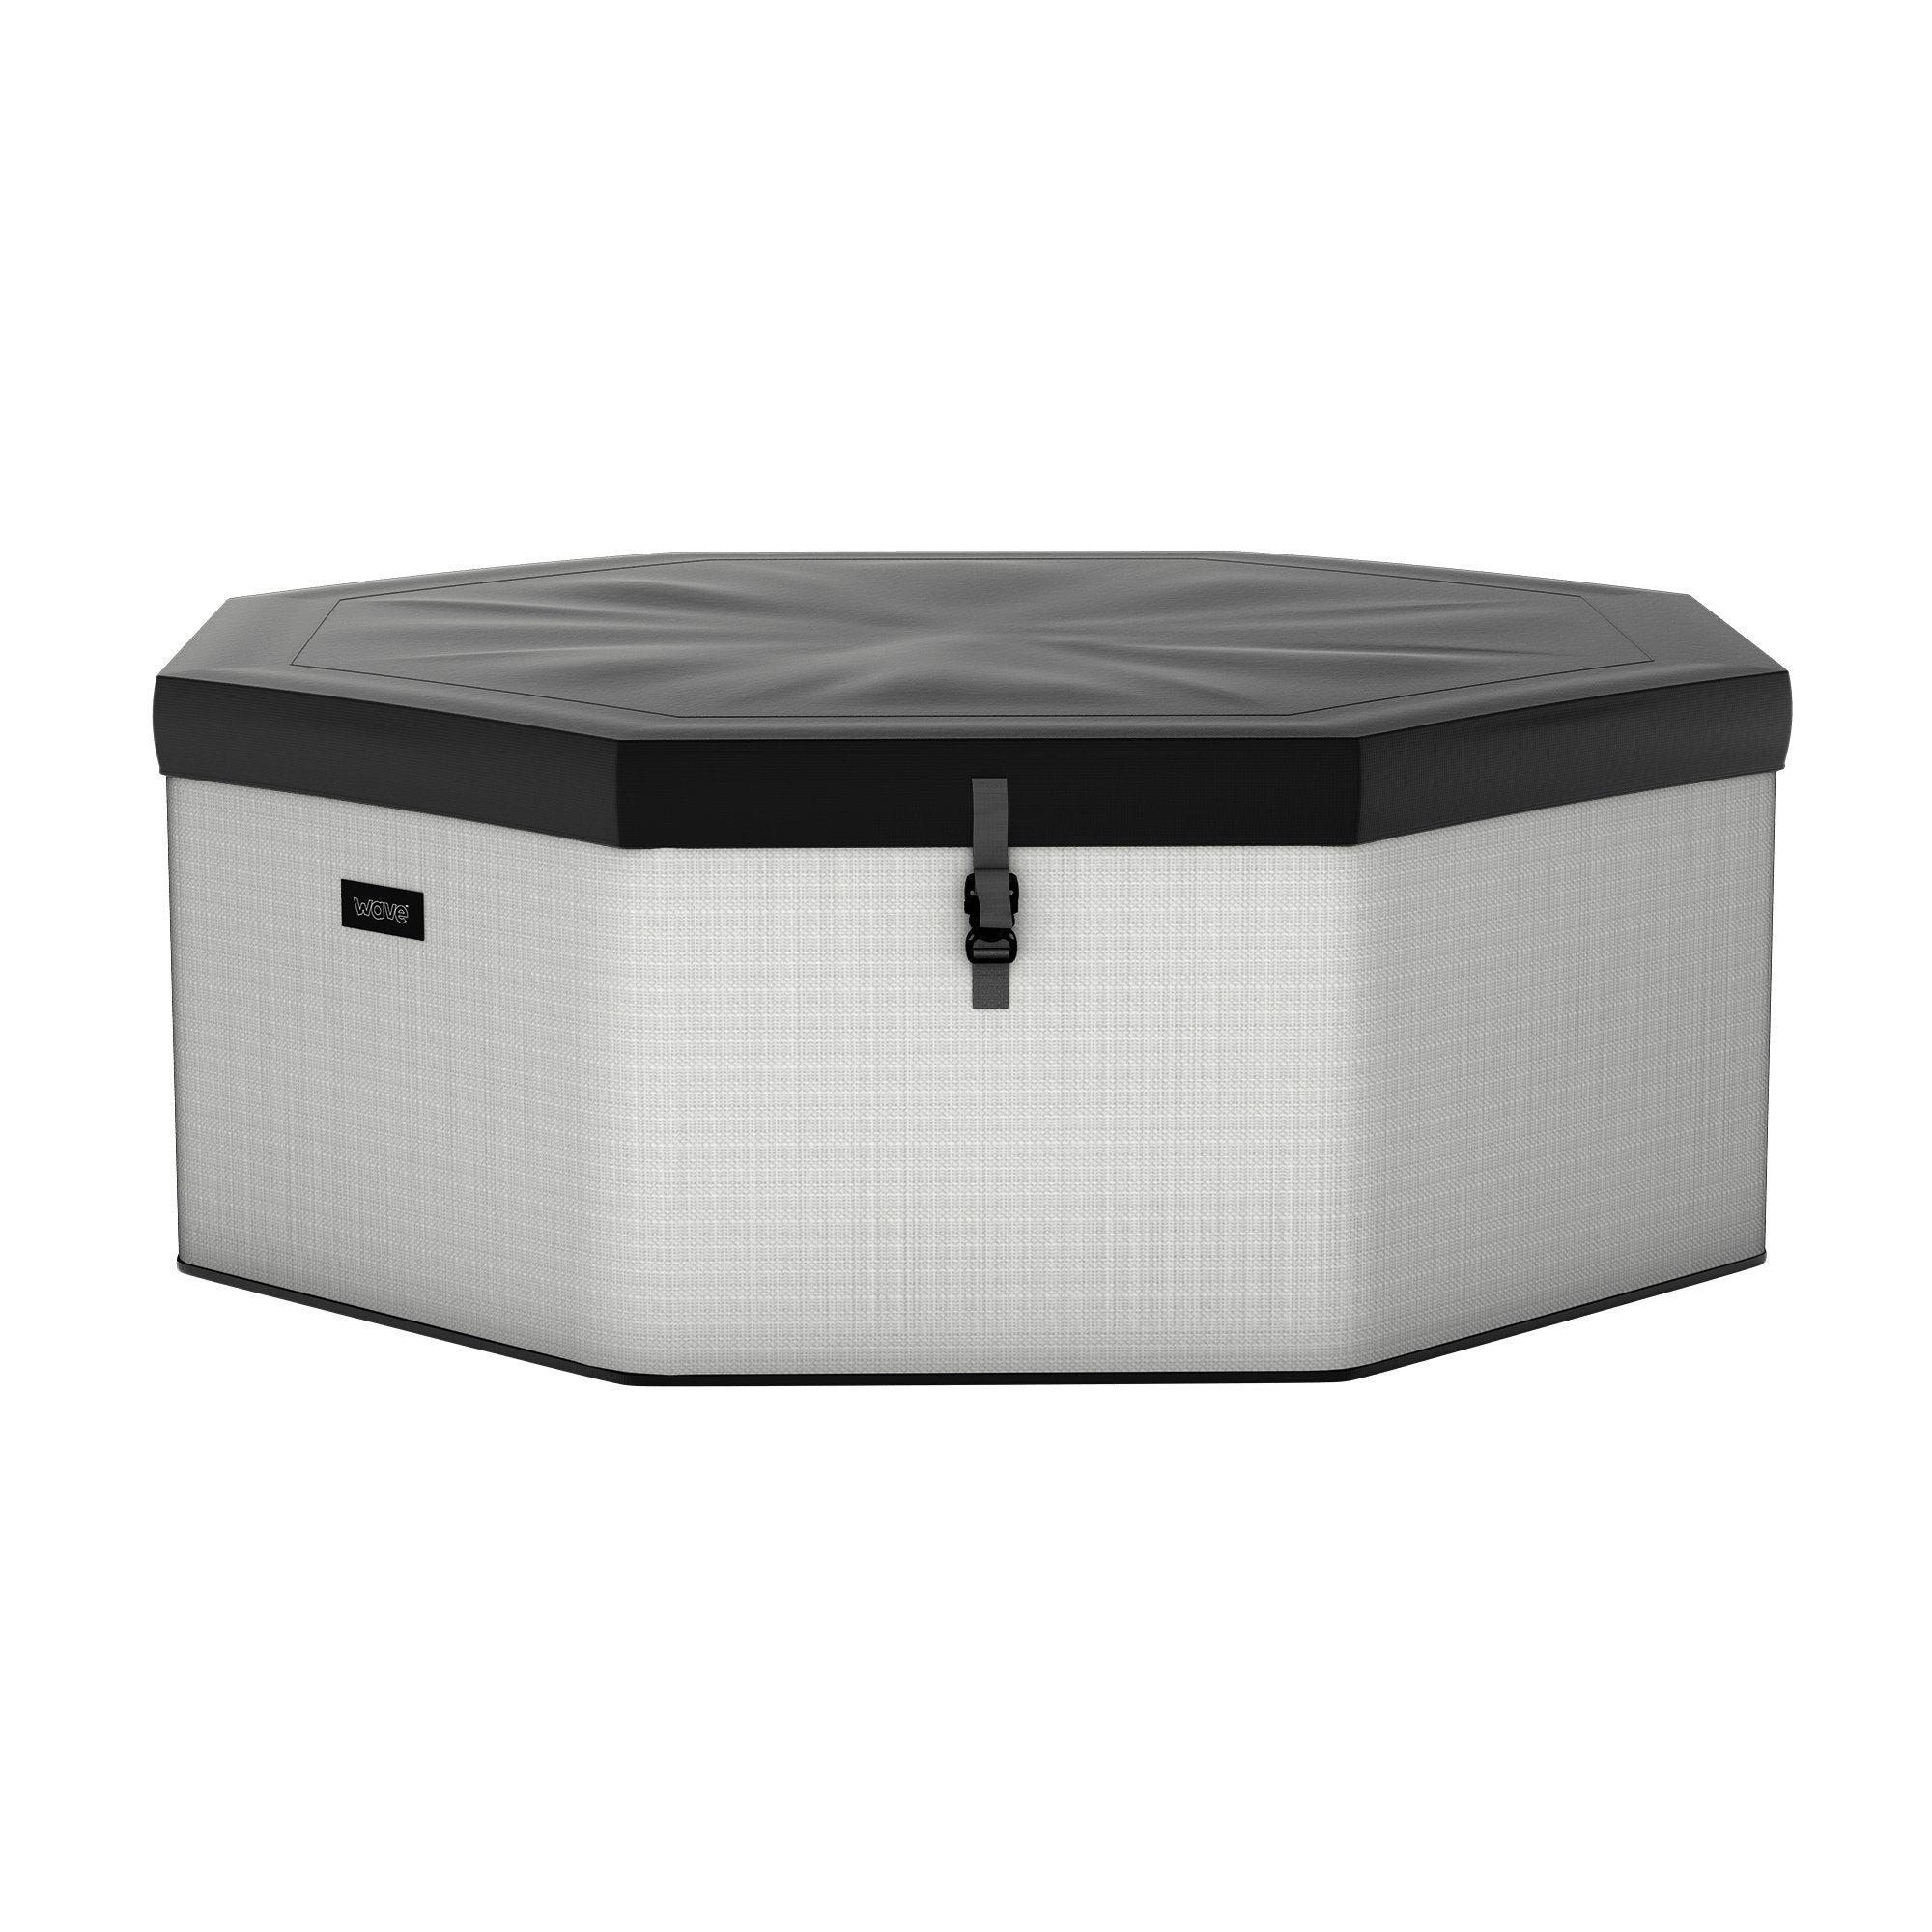 Como v2 | 6-Person Eco Foam Hot Tub | Integrated Heater | Graphite Grey - Wave Spas Inflatable, foam Hot Tubs